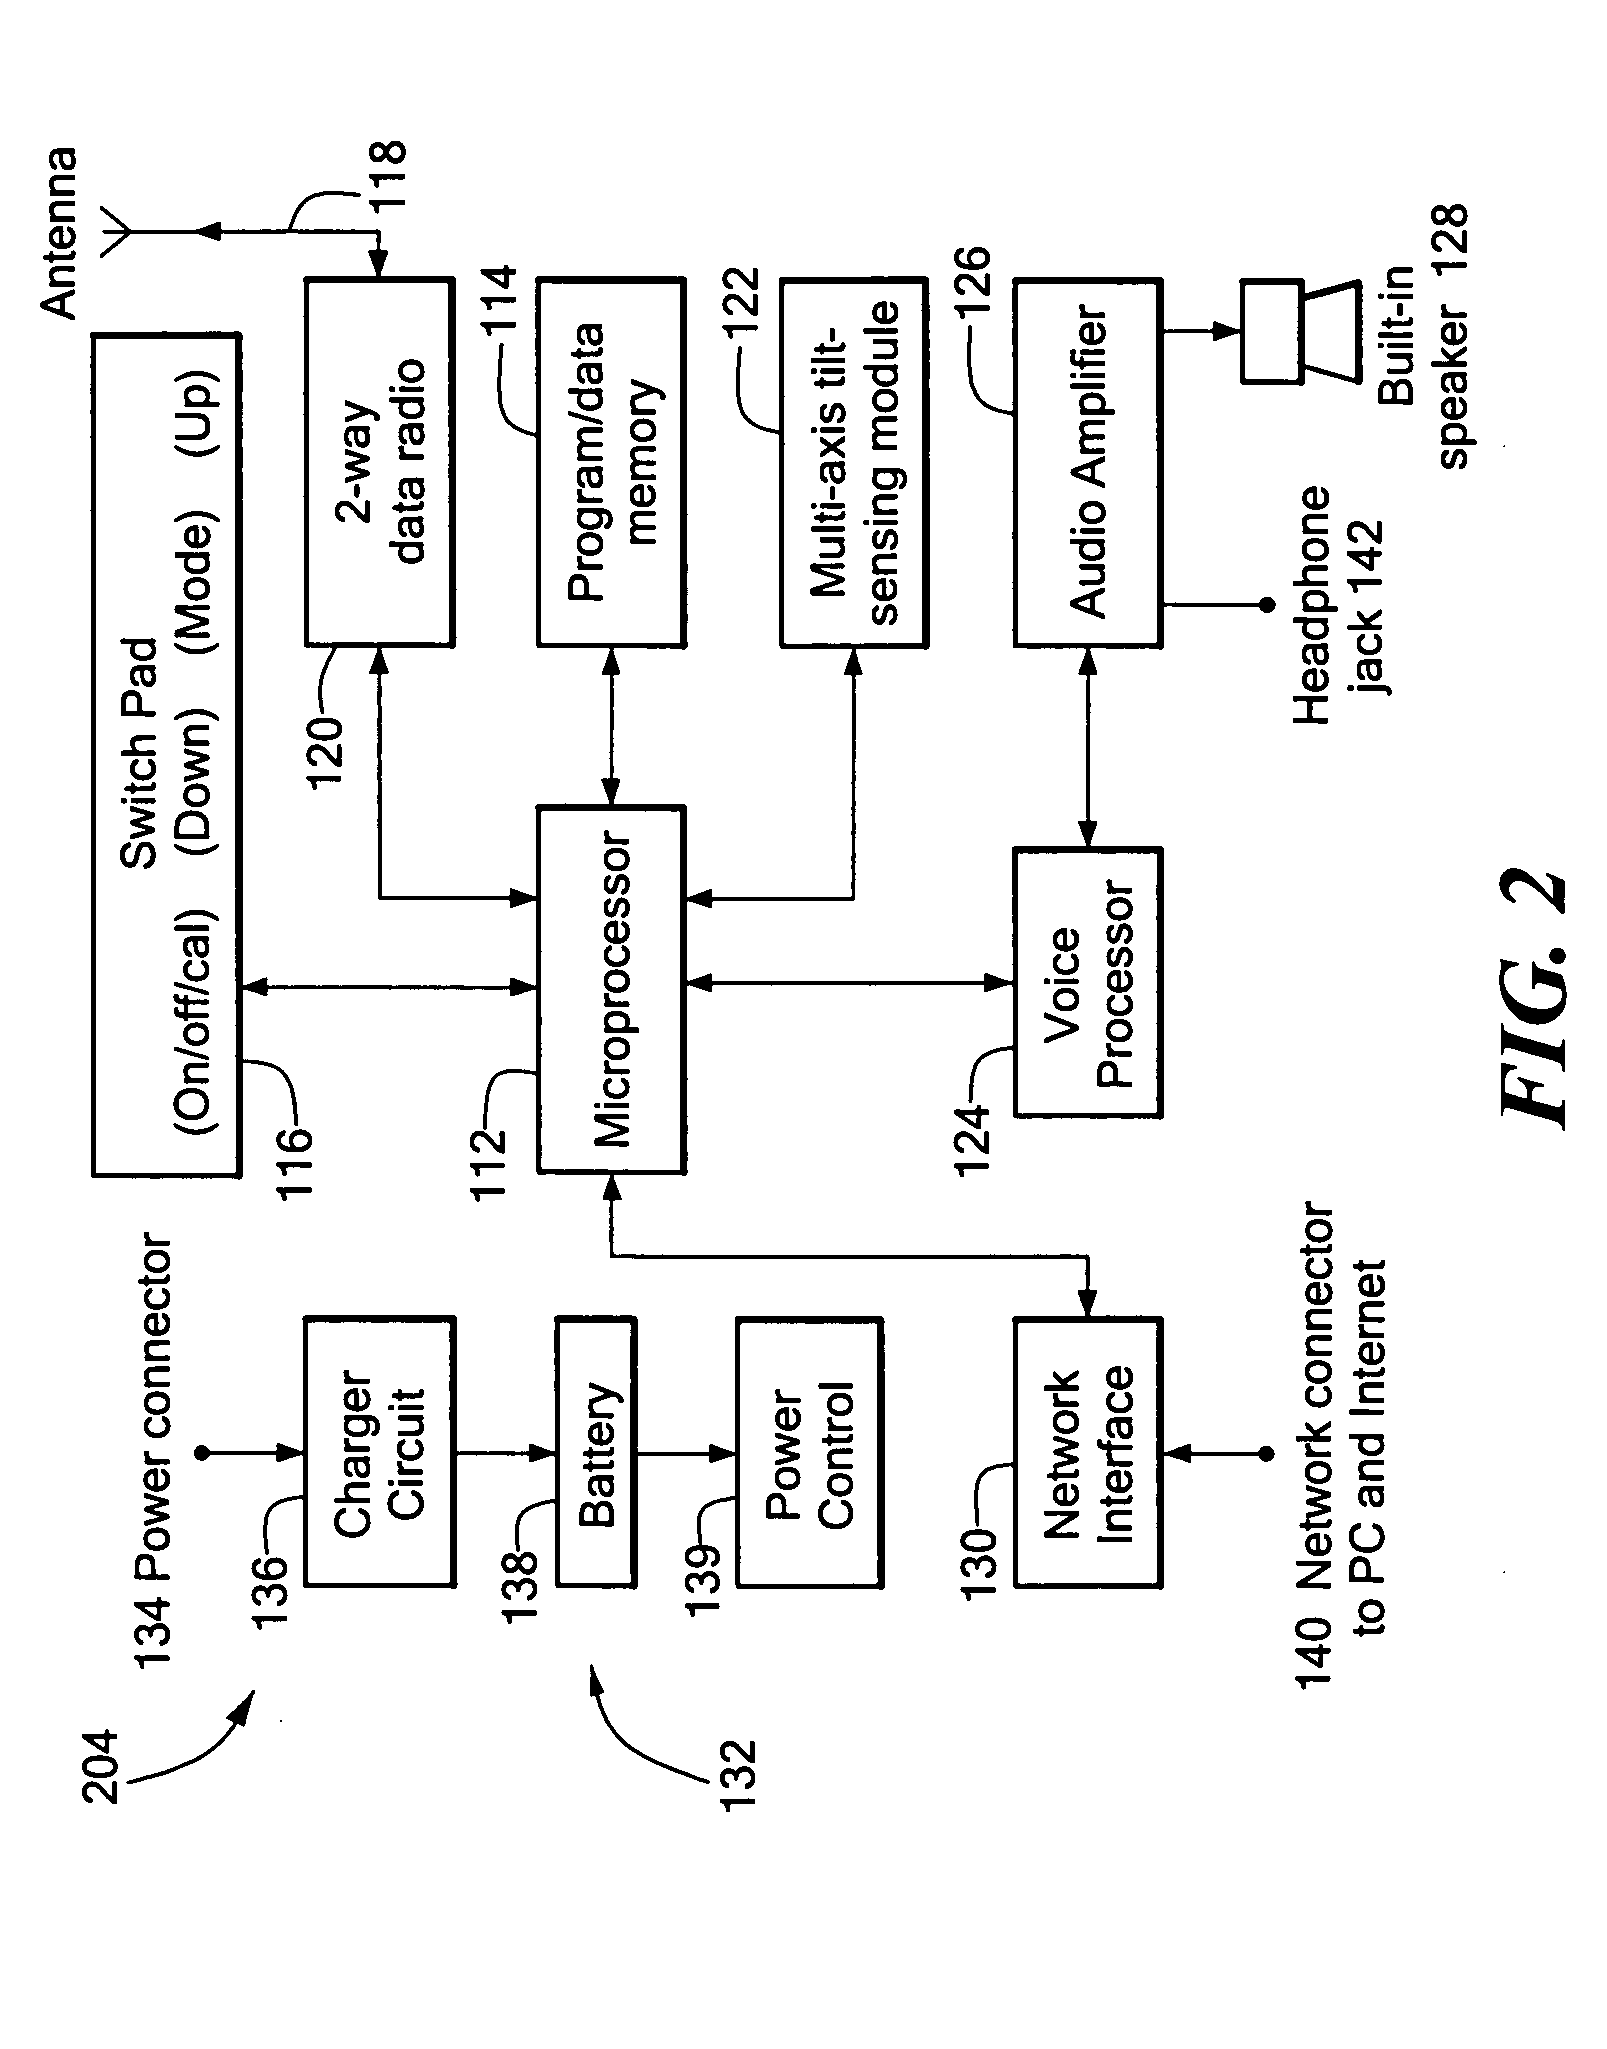 Adjustable training system for athletics and physical rehabilitation including student unit and remote unit communicable therewith